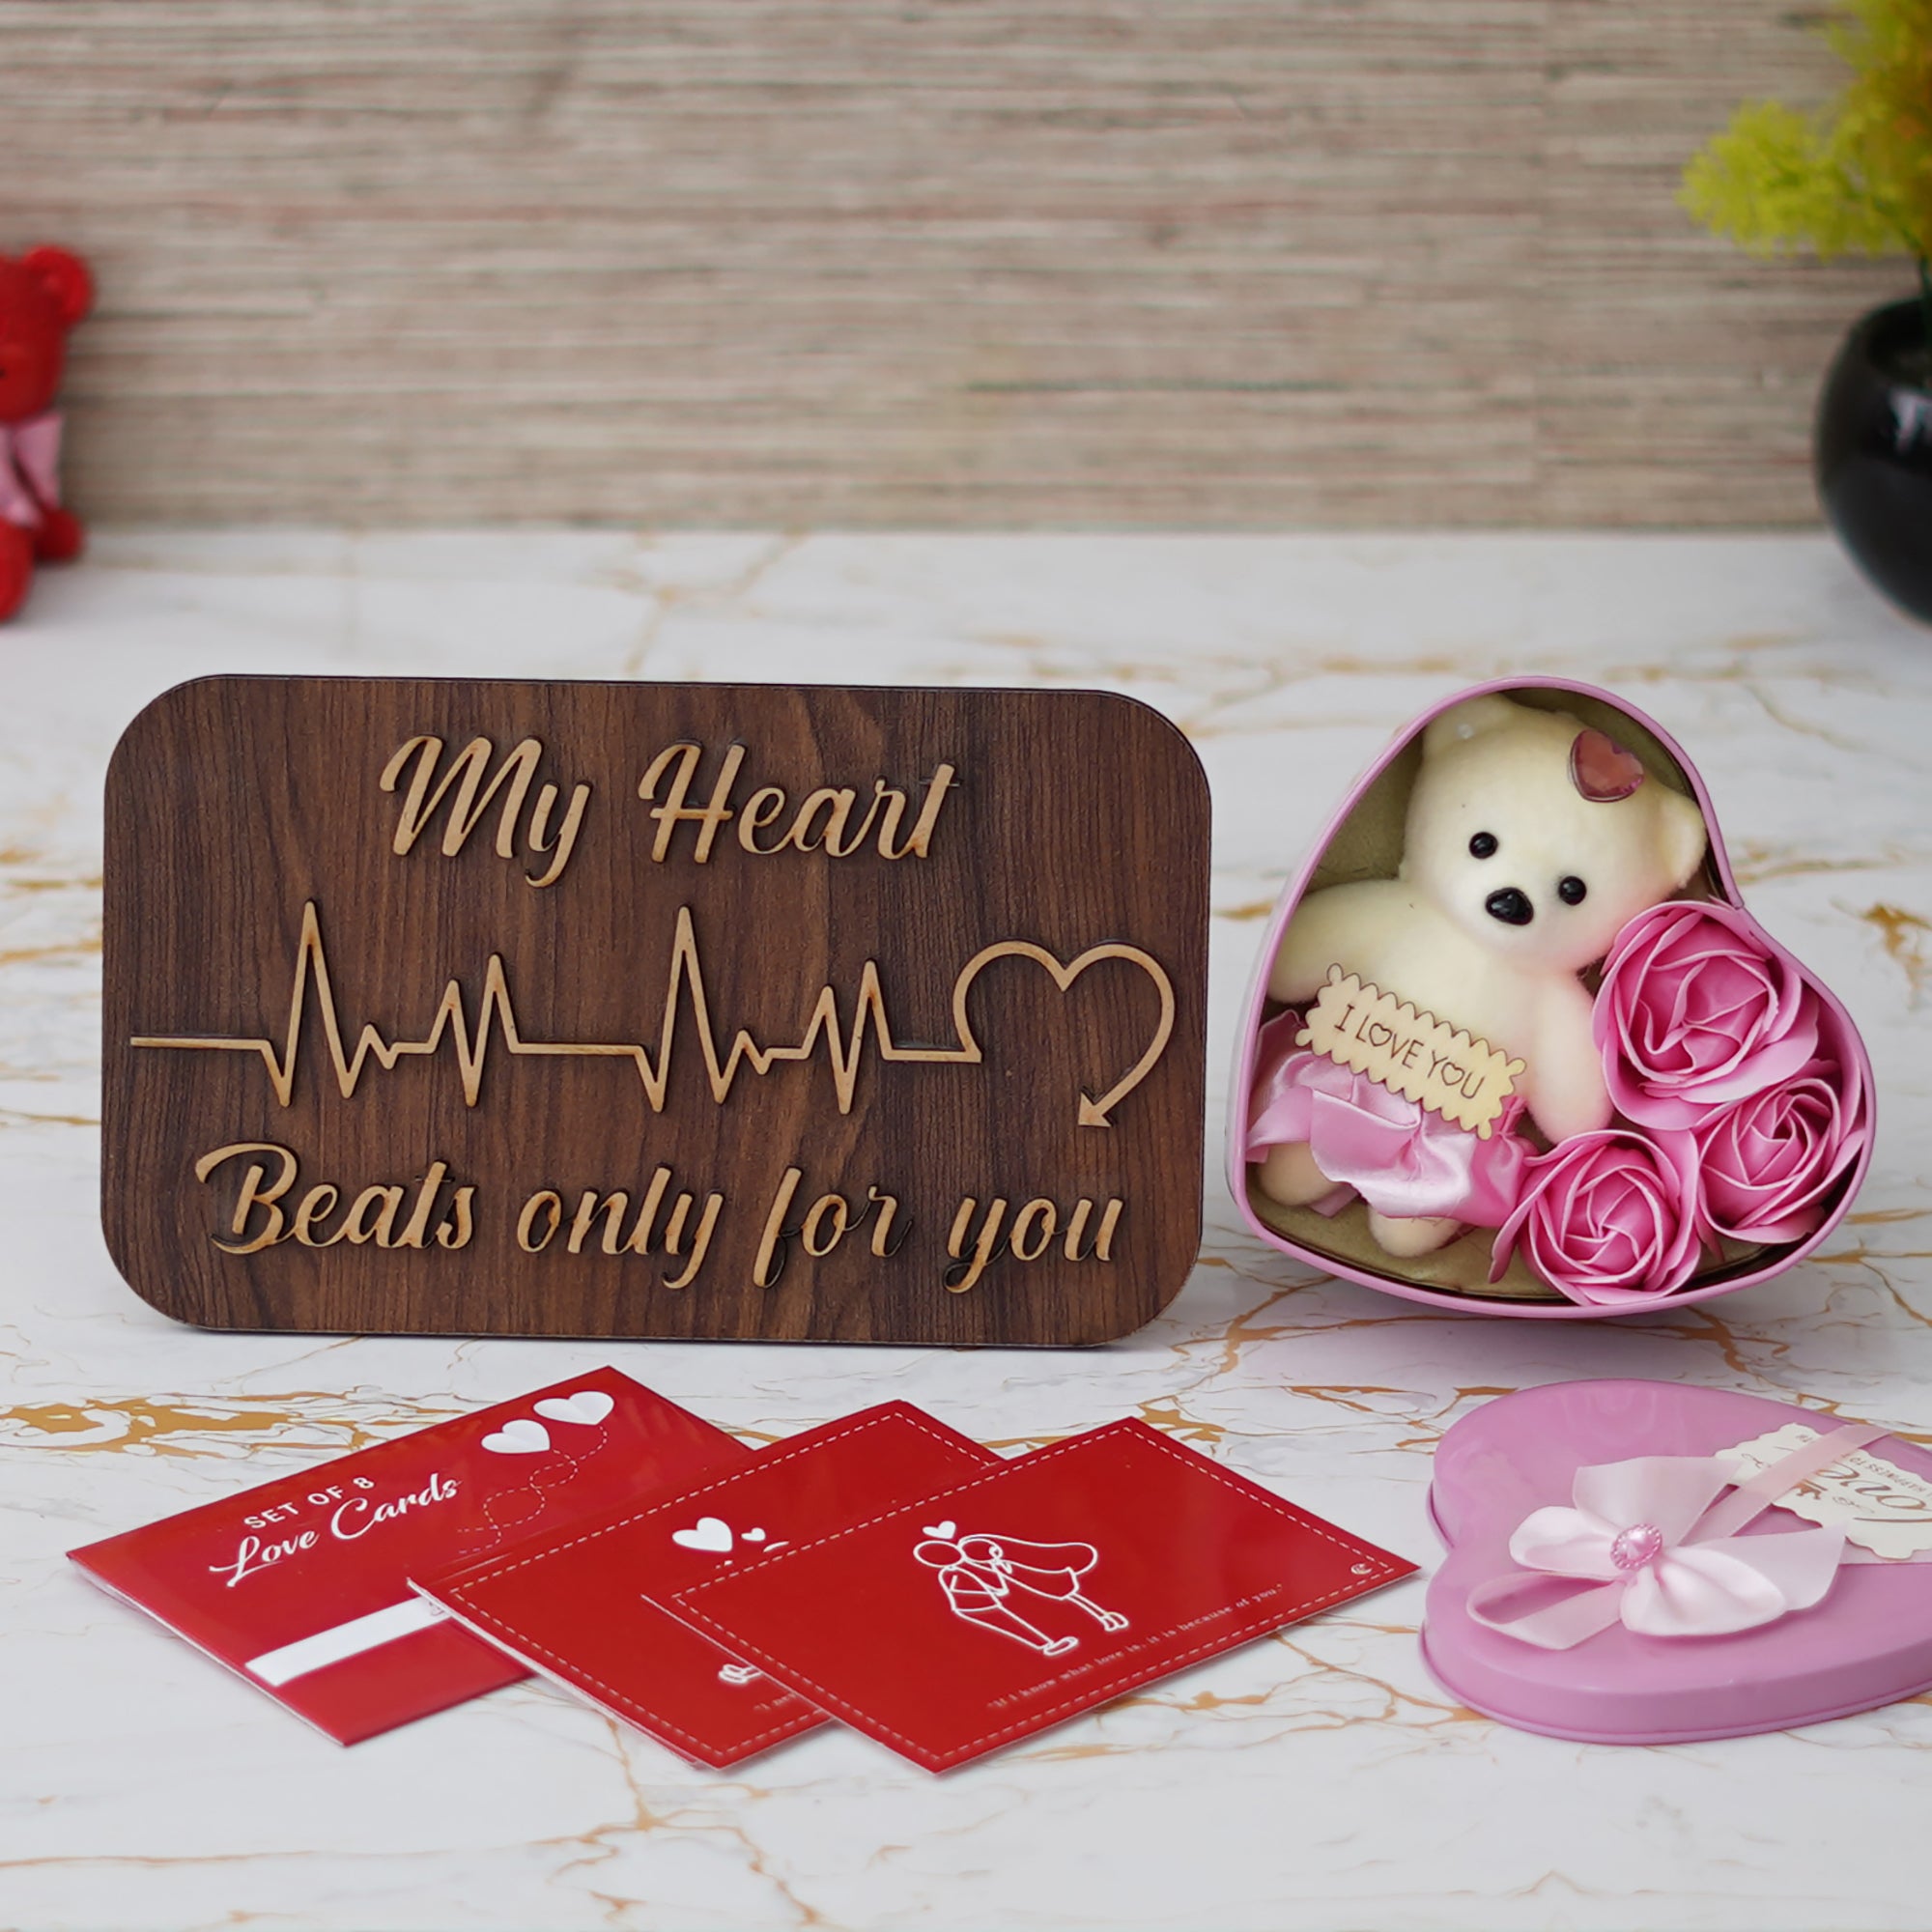 Valentine Combo of Set of 8 Love Post Cards Gift Cards Set, "My Heart Beats Only For You" Wooden Showpiece With Stand, Pink Heart Shaped Gift Box with Teddy and Roses